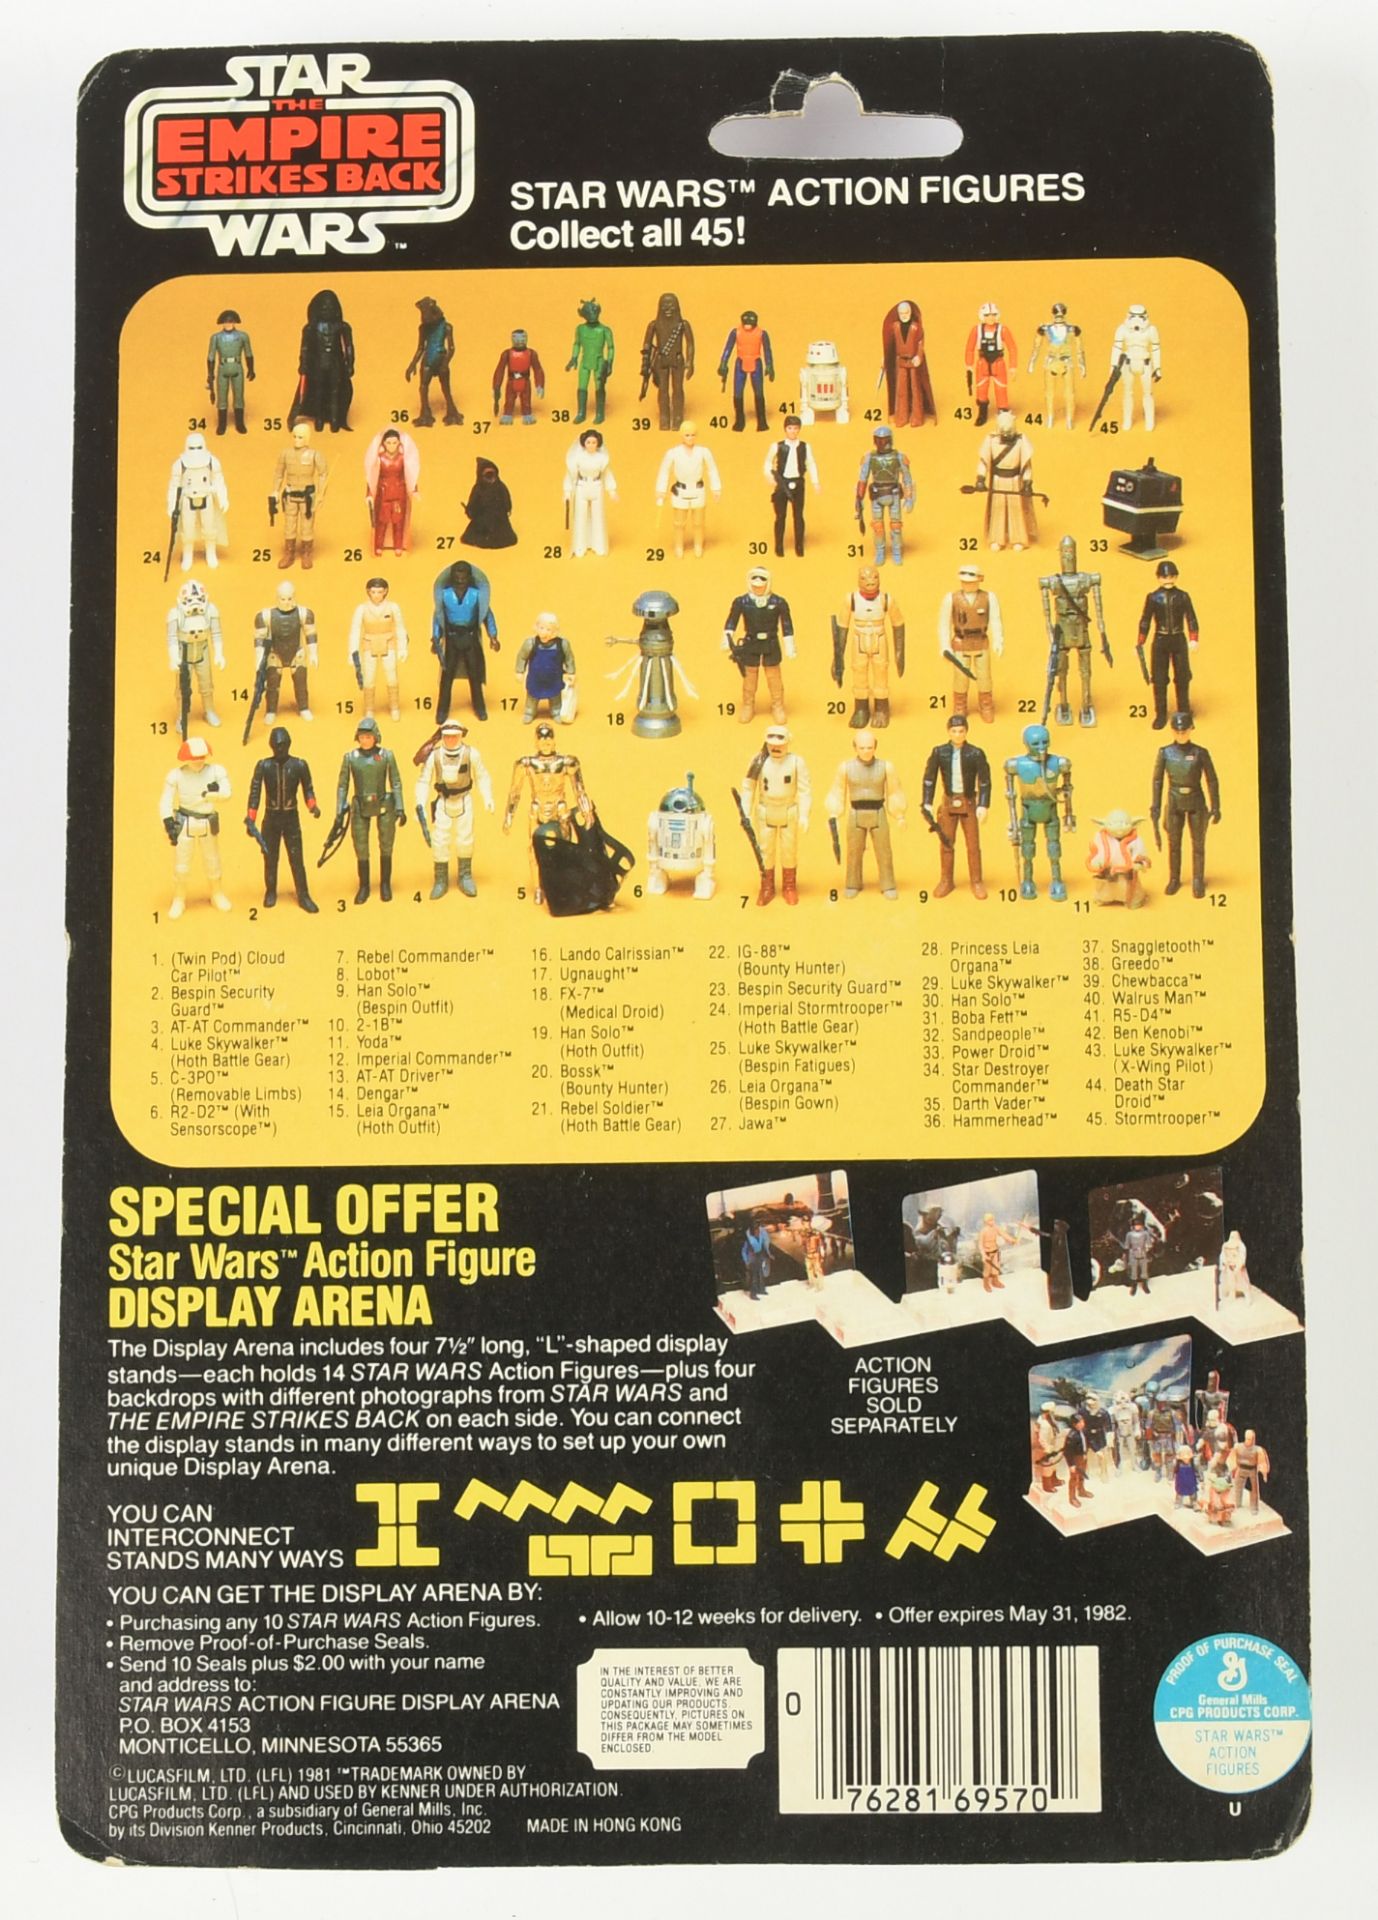 Kenner Star Wars vintage The Empire Strikes Back Bespin Guard 3 3/4" figure MOC - Image 2 of 4